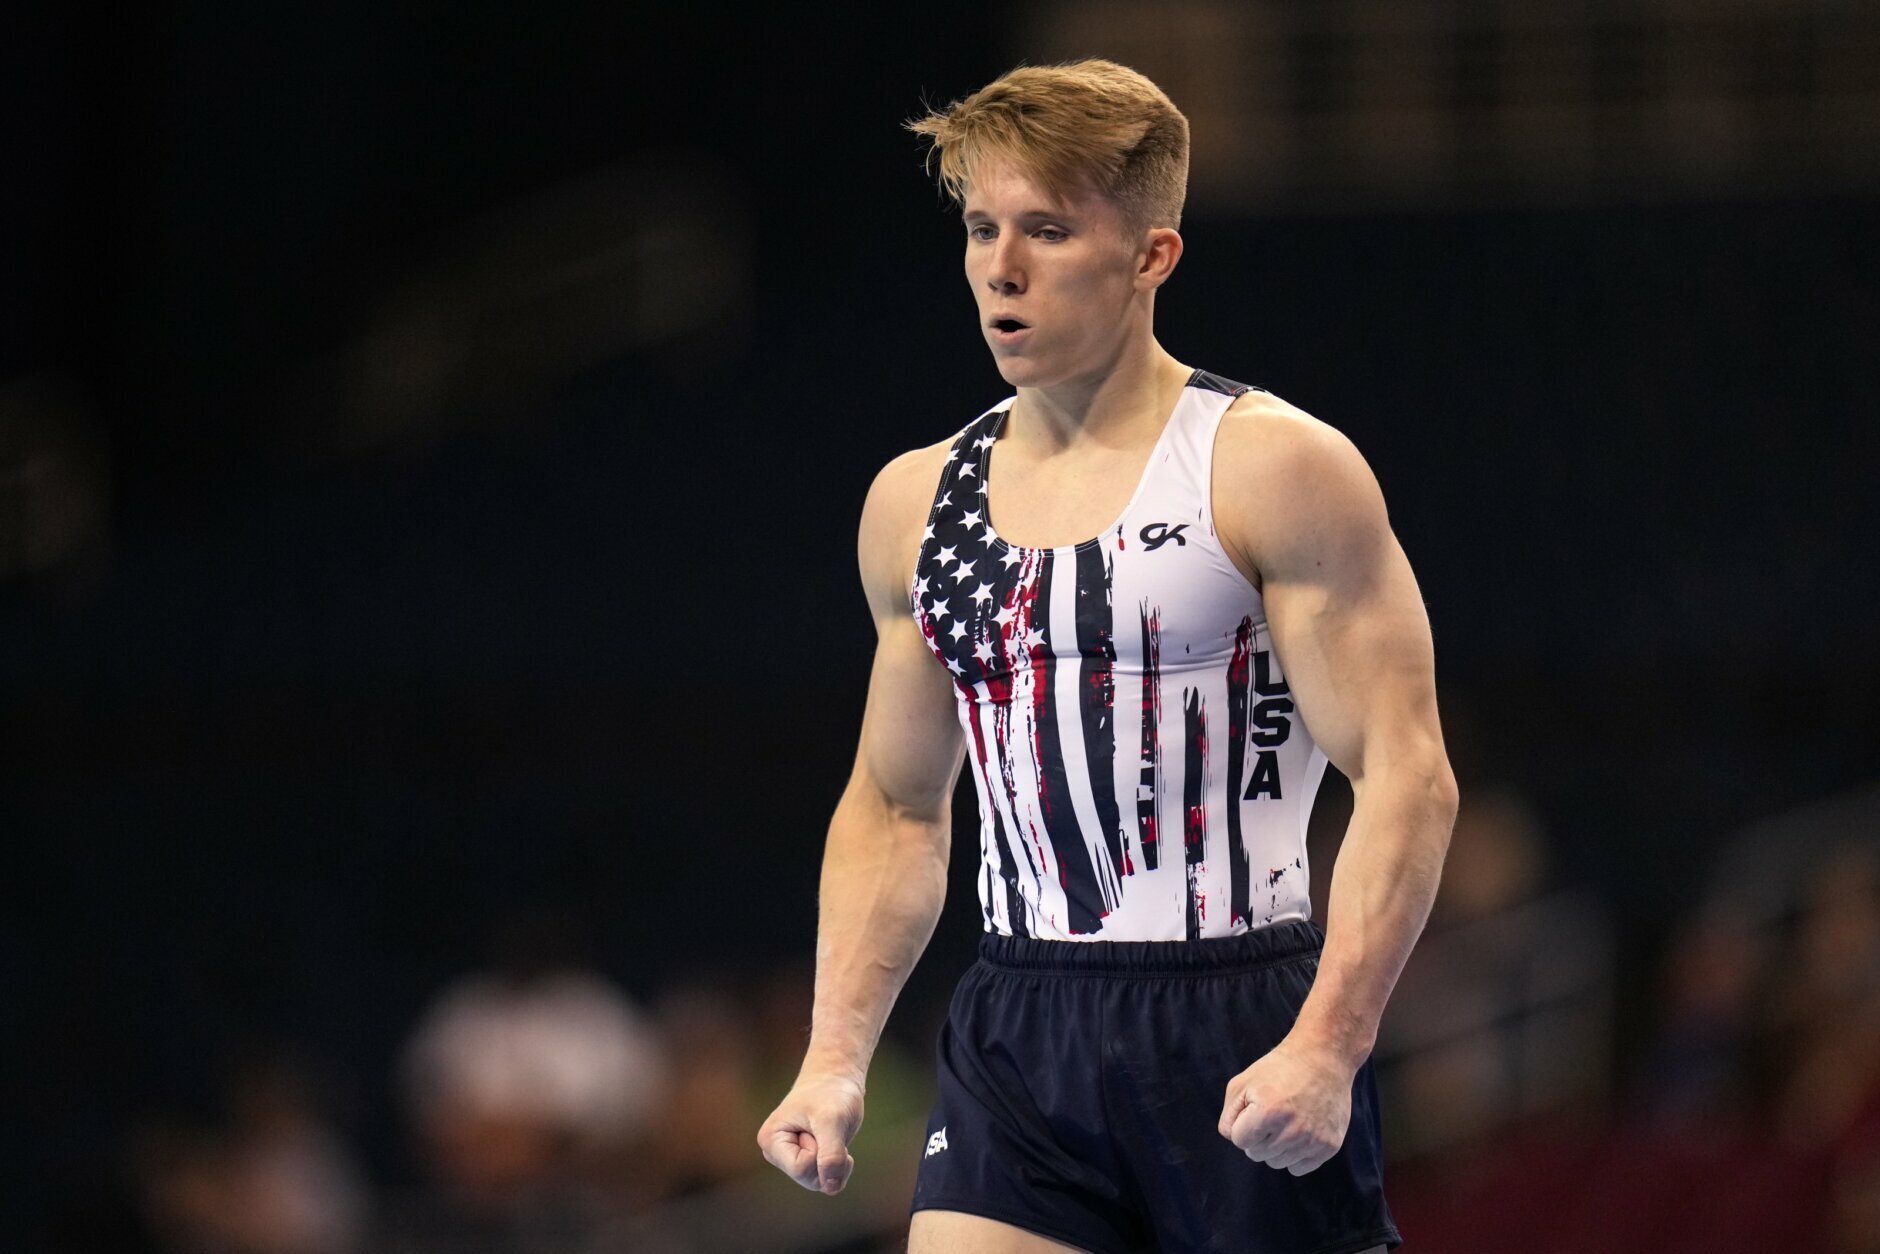 <p>Shane Wiskus reacts after competing in the floor exercise during the men&#8217;s U.S. Olympic Gymnastics Trials Thursday, June 24, 2021, in St. Louis.</p>
